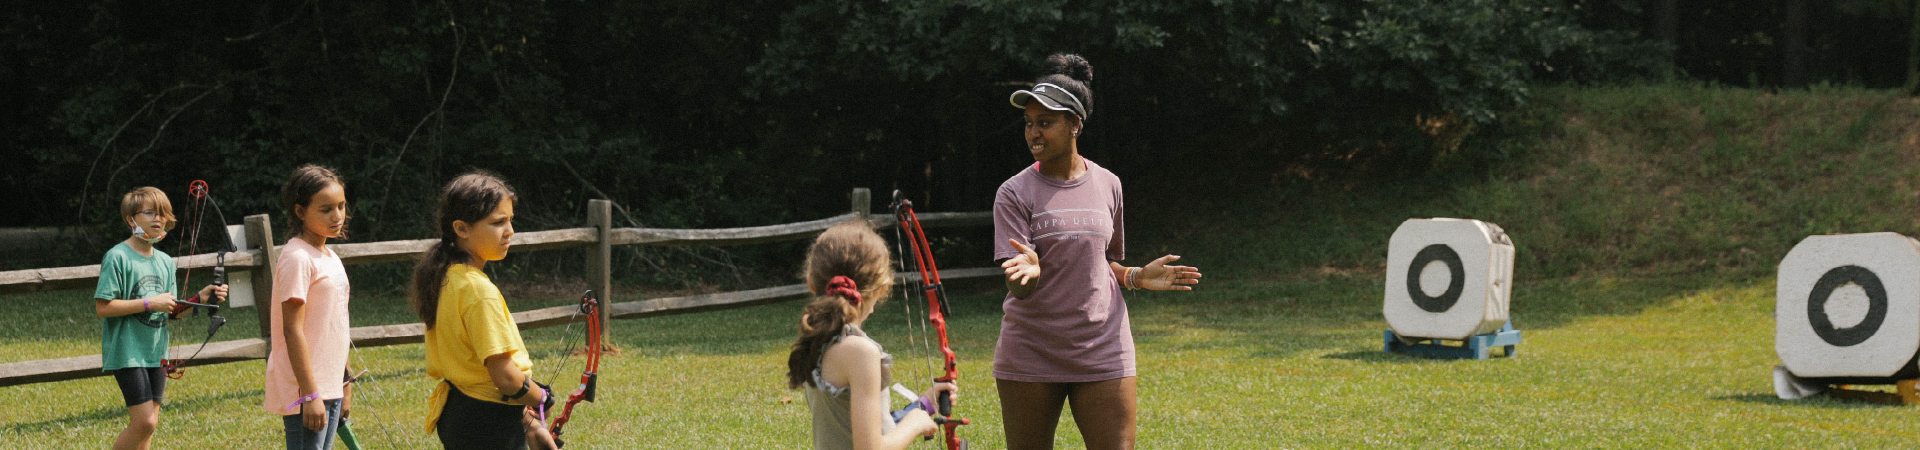  camp staff instructs young girls in archery 